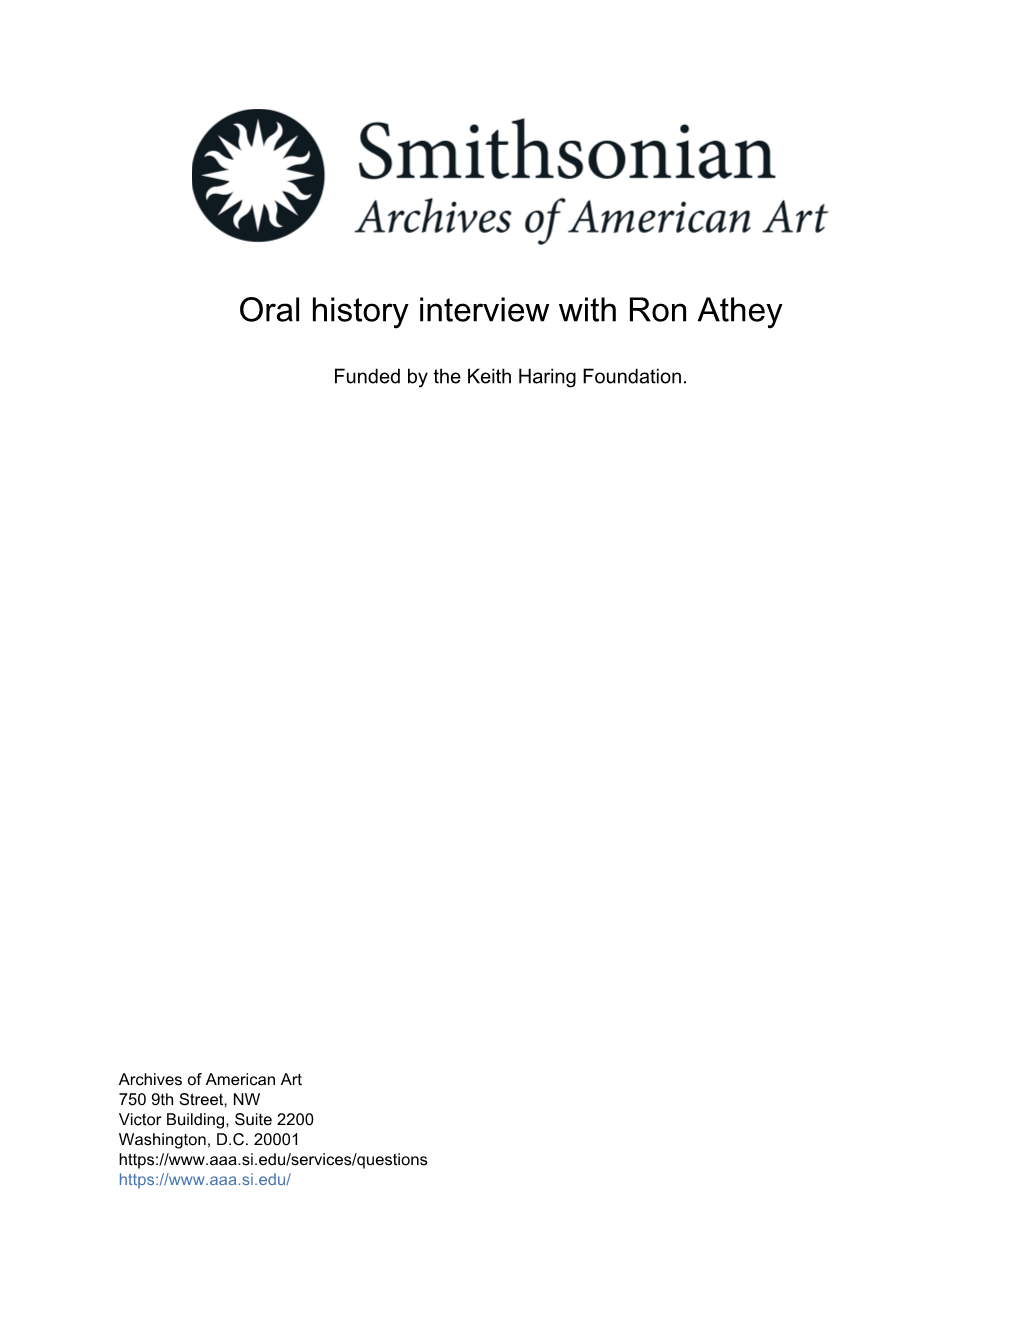 Oral History Interview with Ron Athey